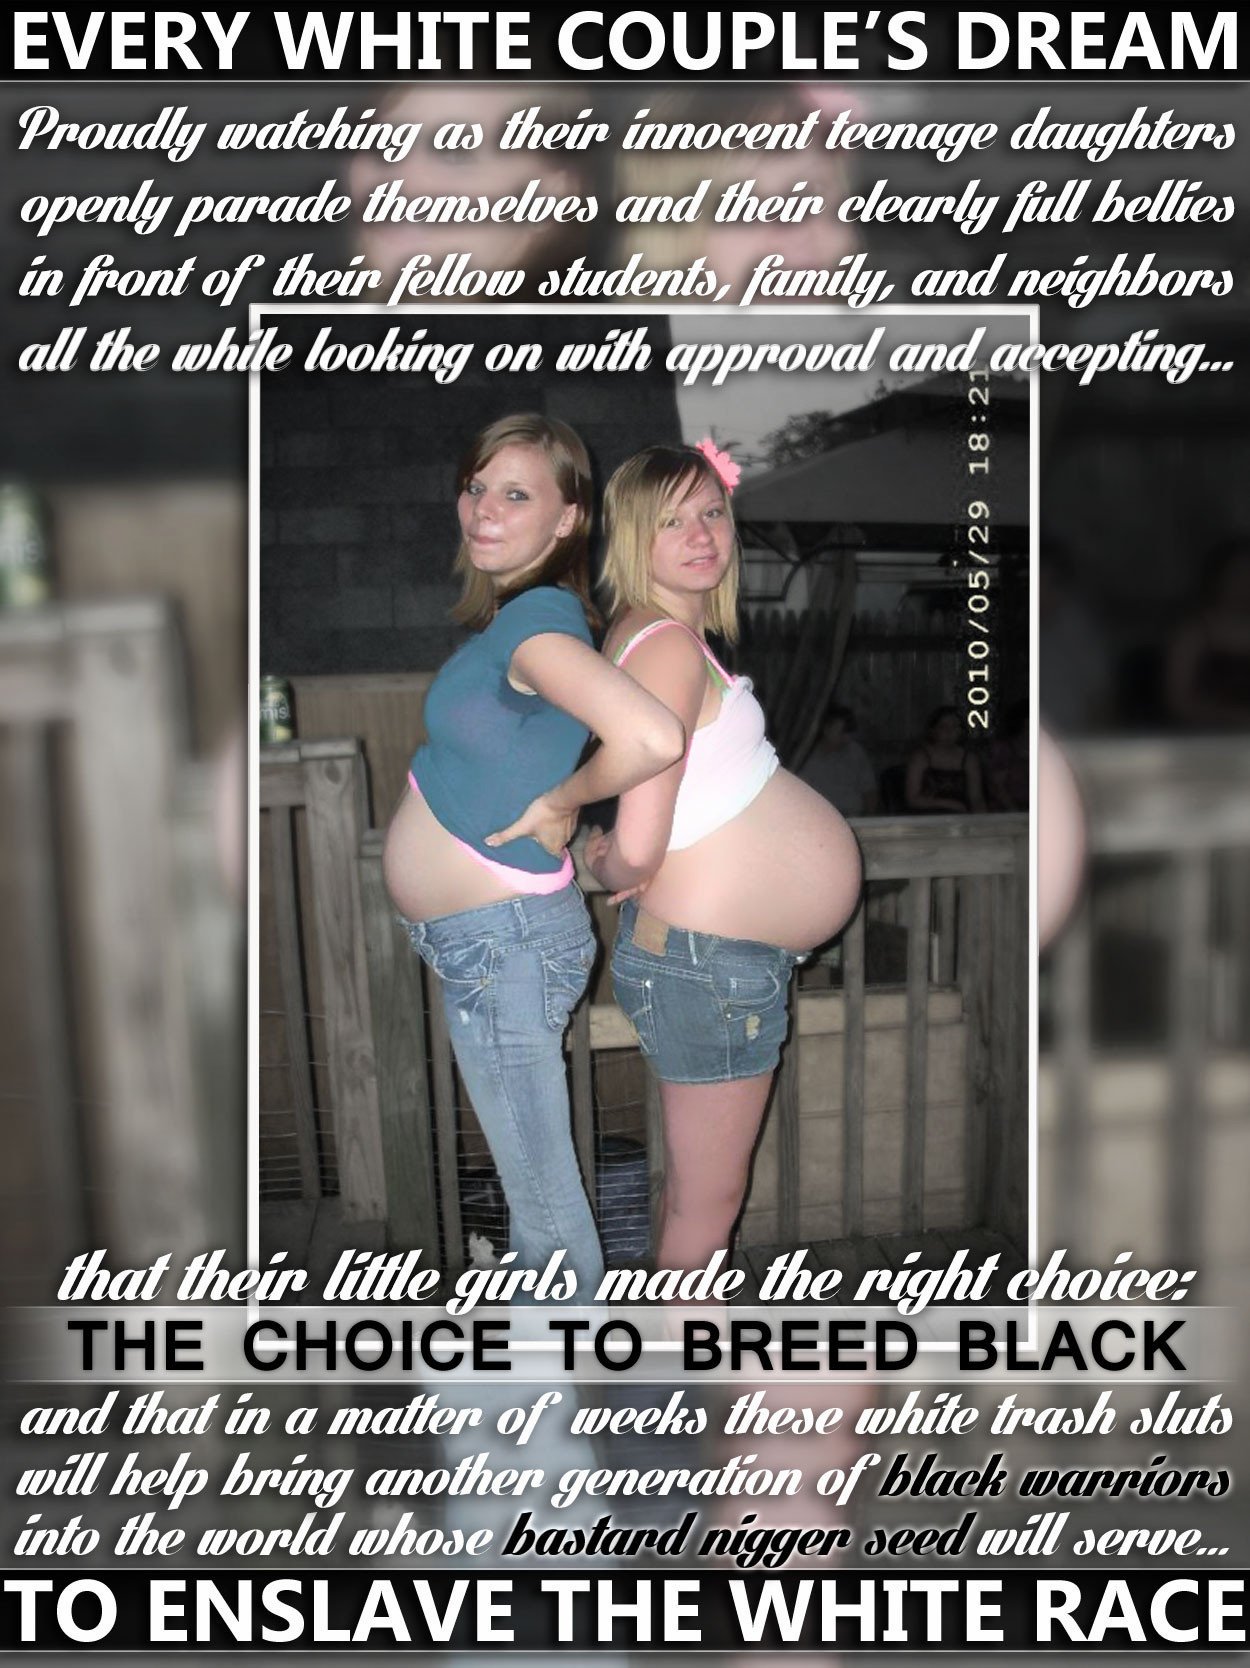 Black And White Interracial Sex Captions - pregnant-interracial-captions-23697 | Darkwanderer - Cuckold forums